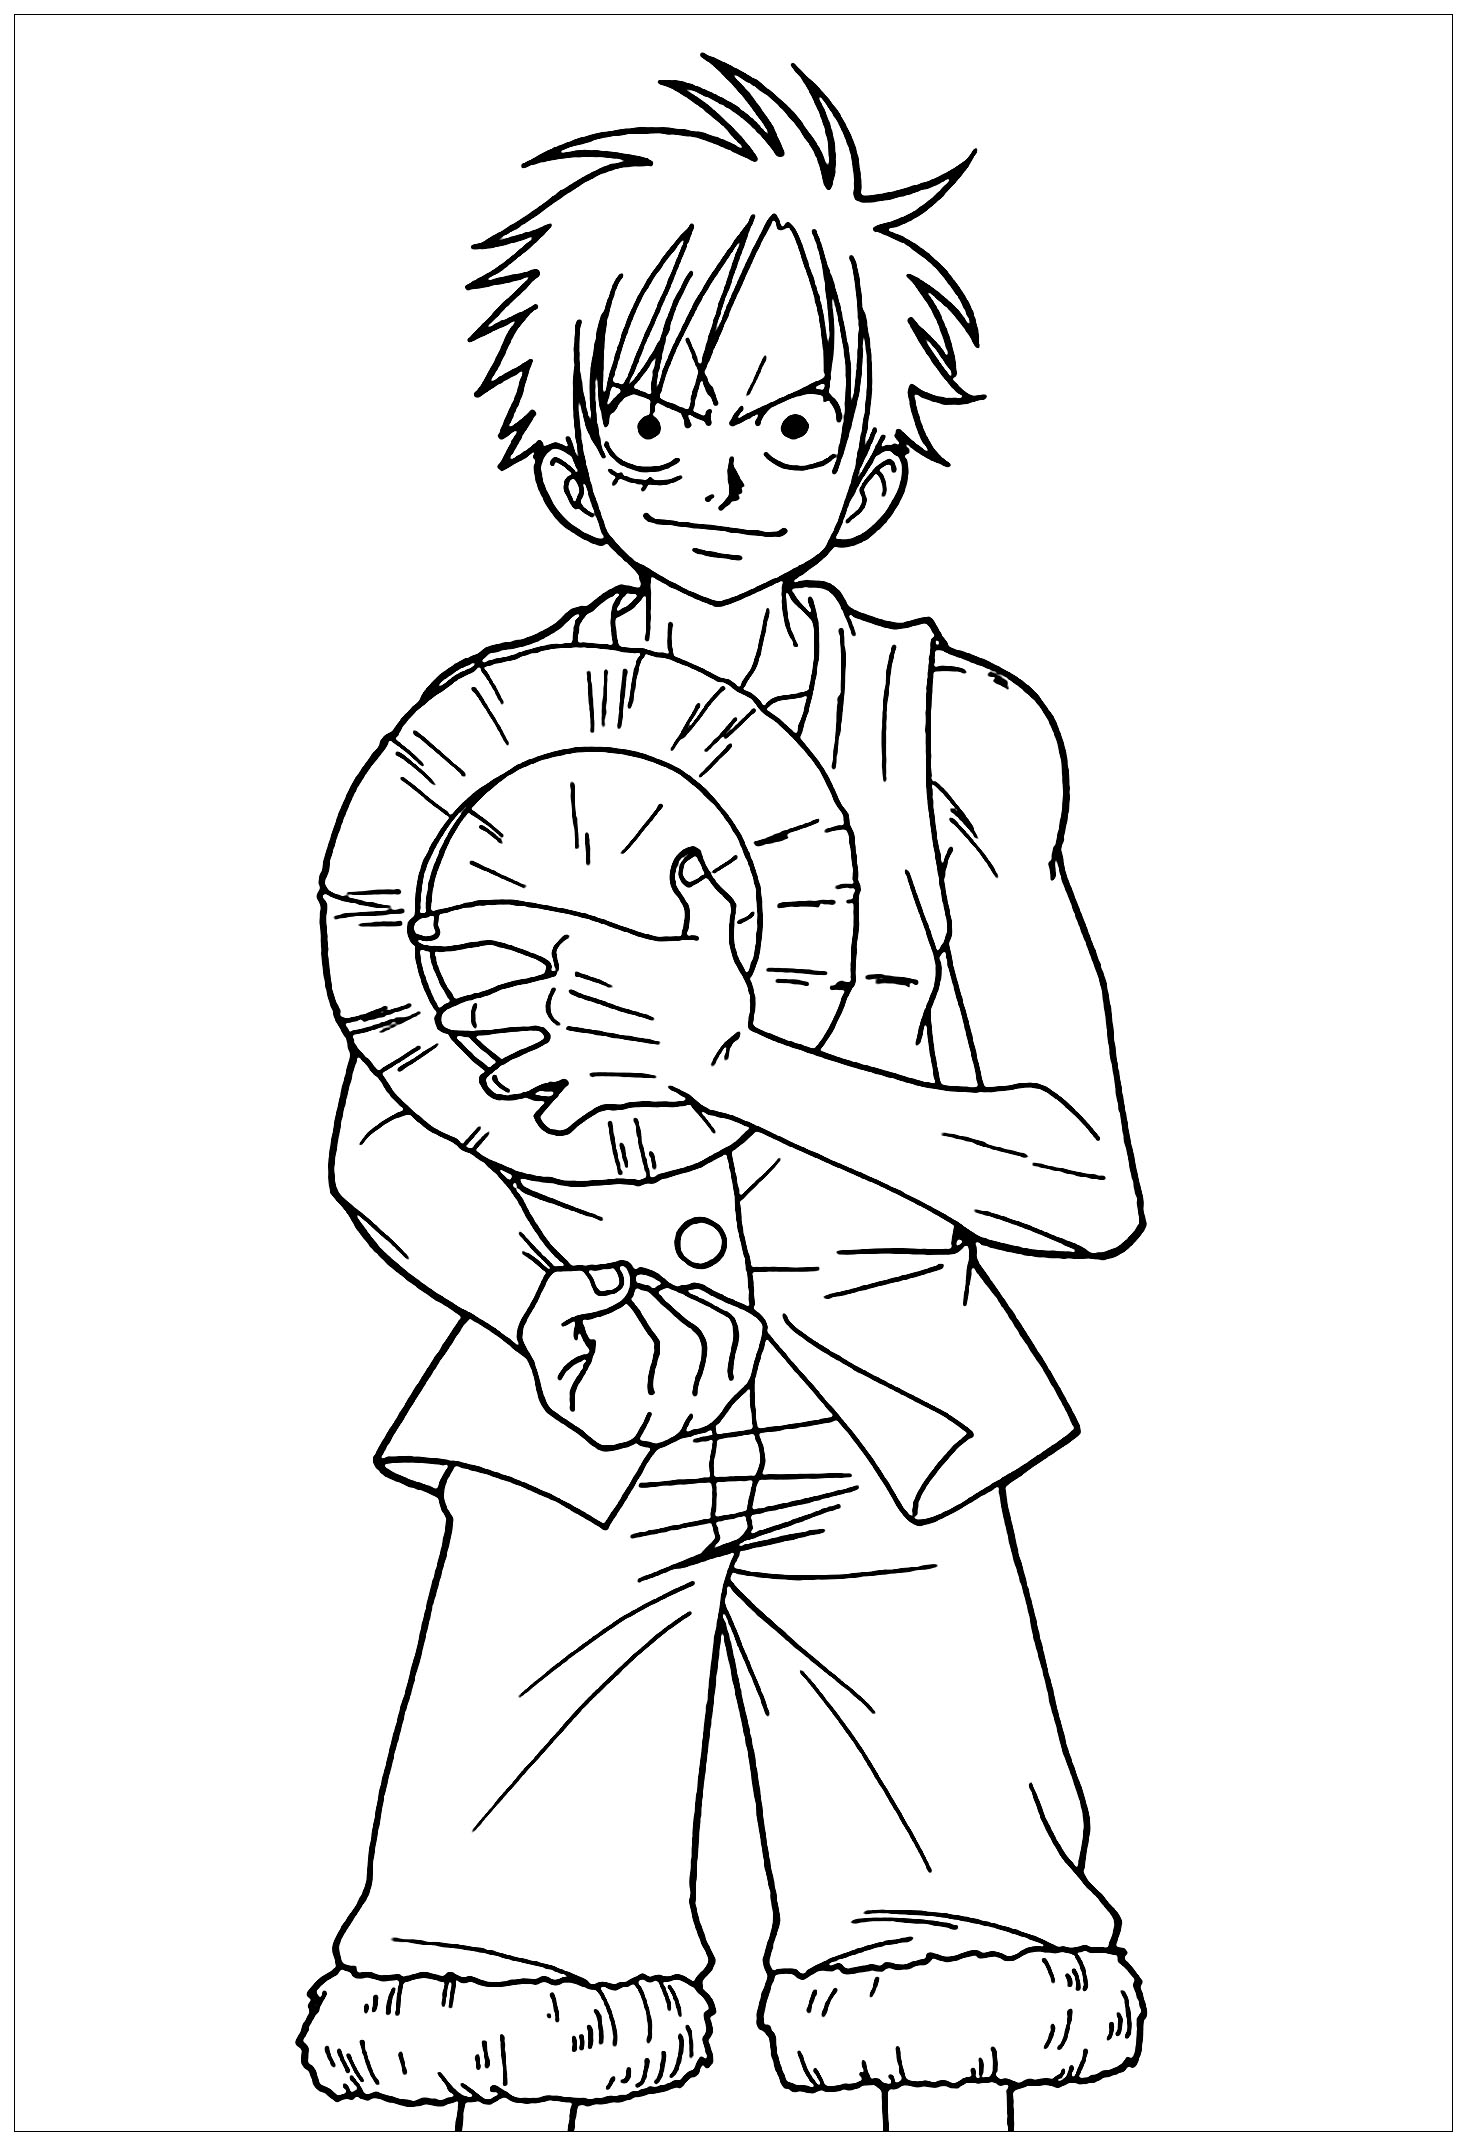 Anime Coloring Pages One Piece - Coloring and Drawing